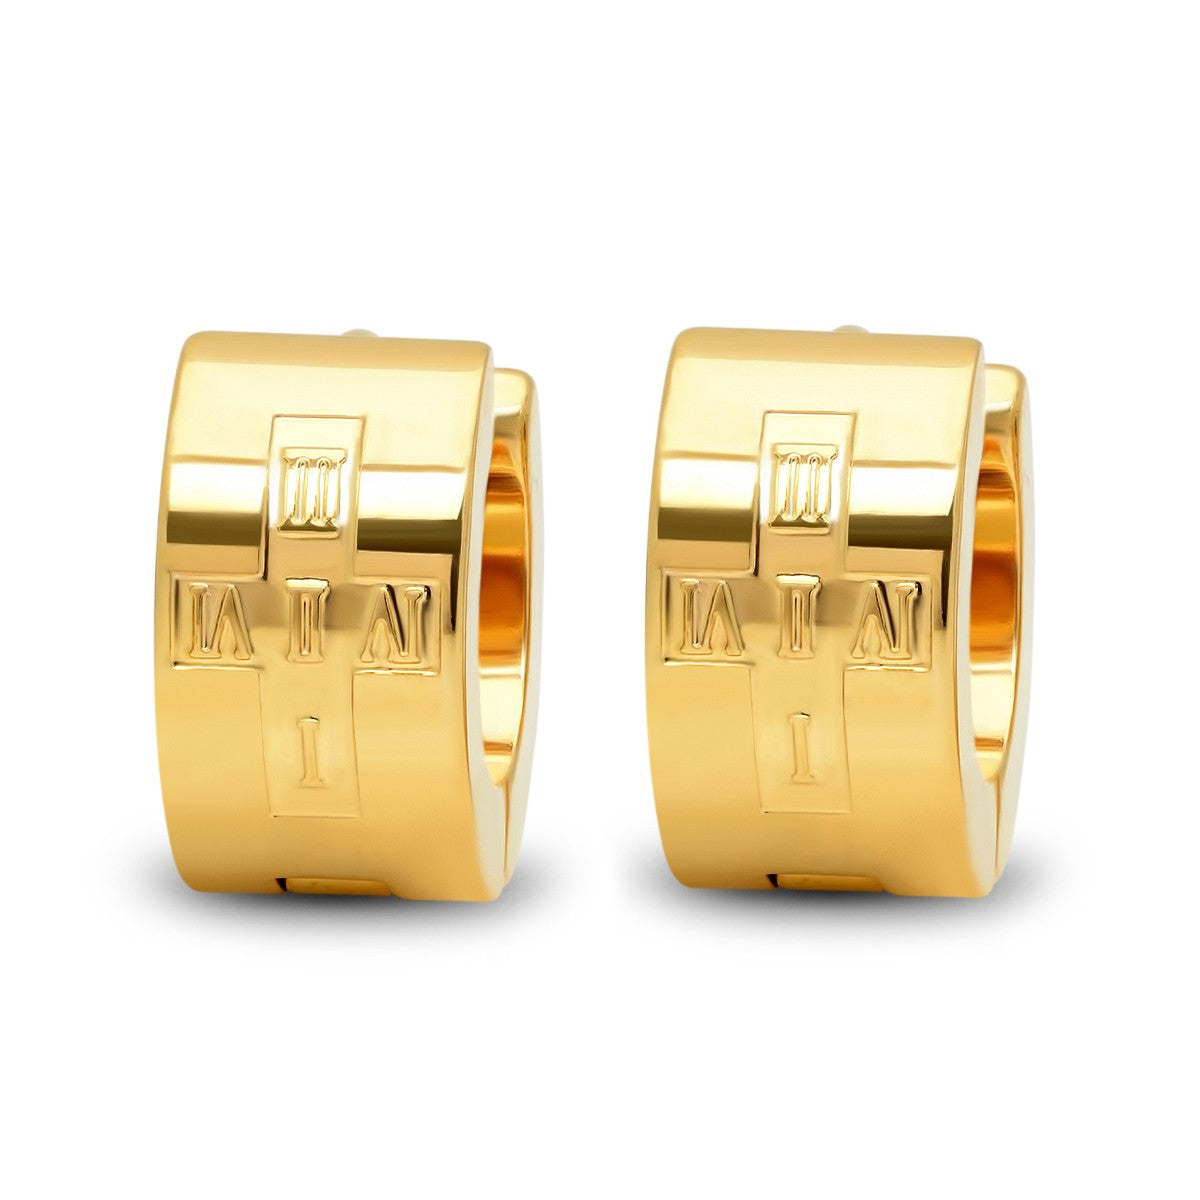 title:SteelTime Women's Stainless Steel Huggie Earrings With Roman Numeral Accents;color:Gold